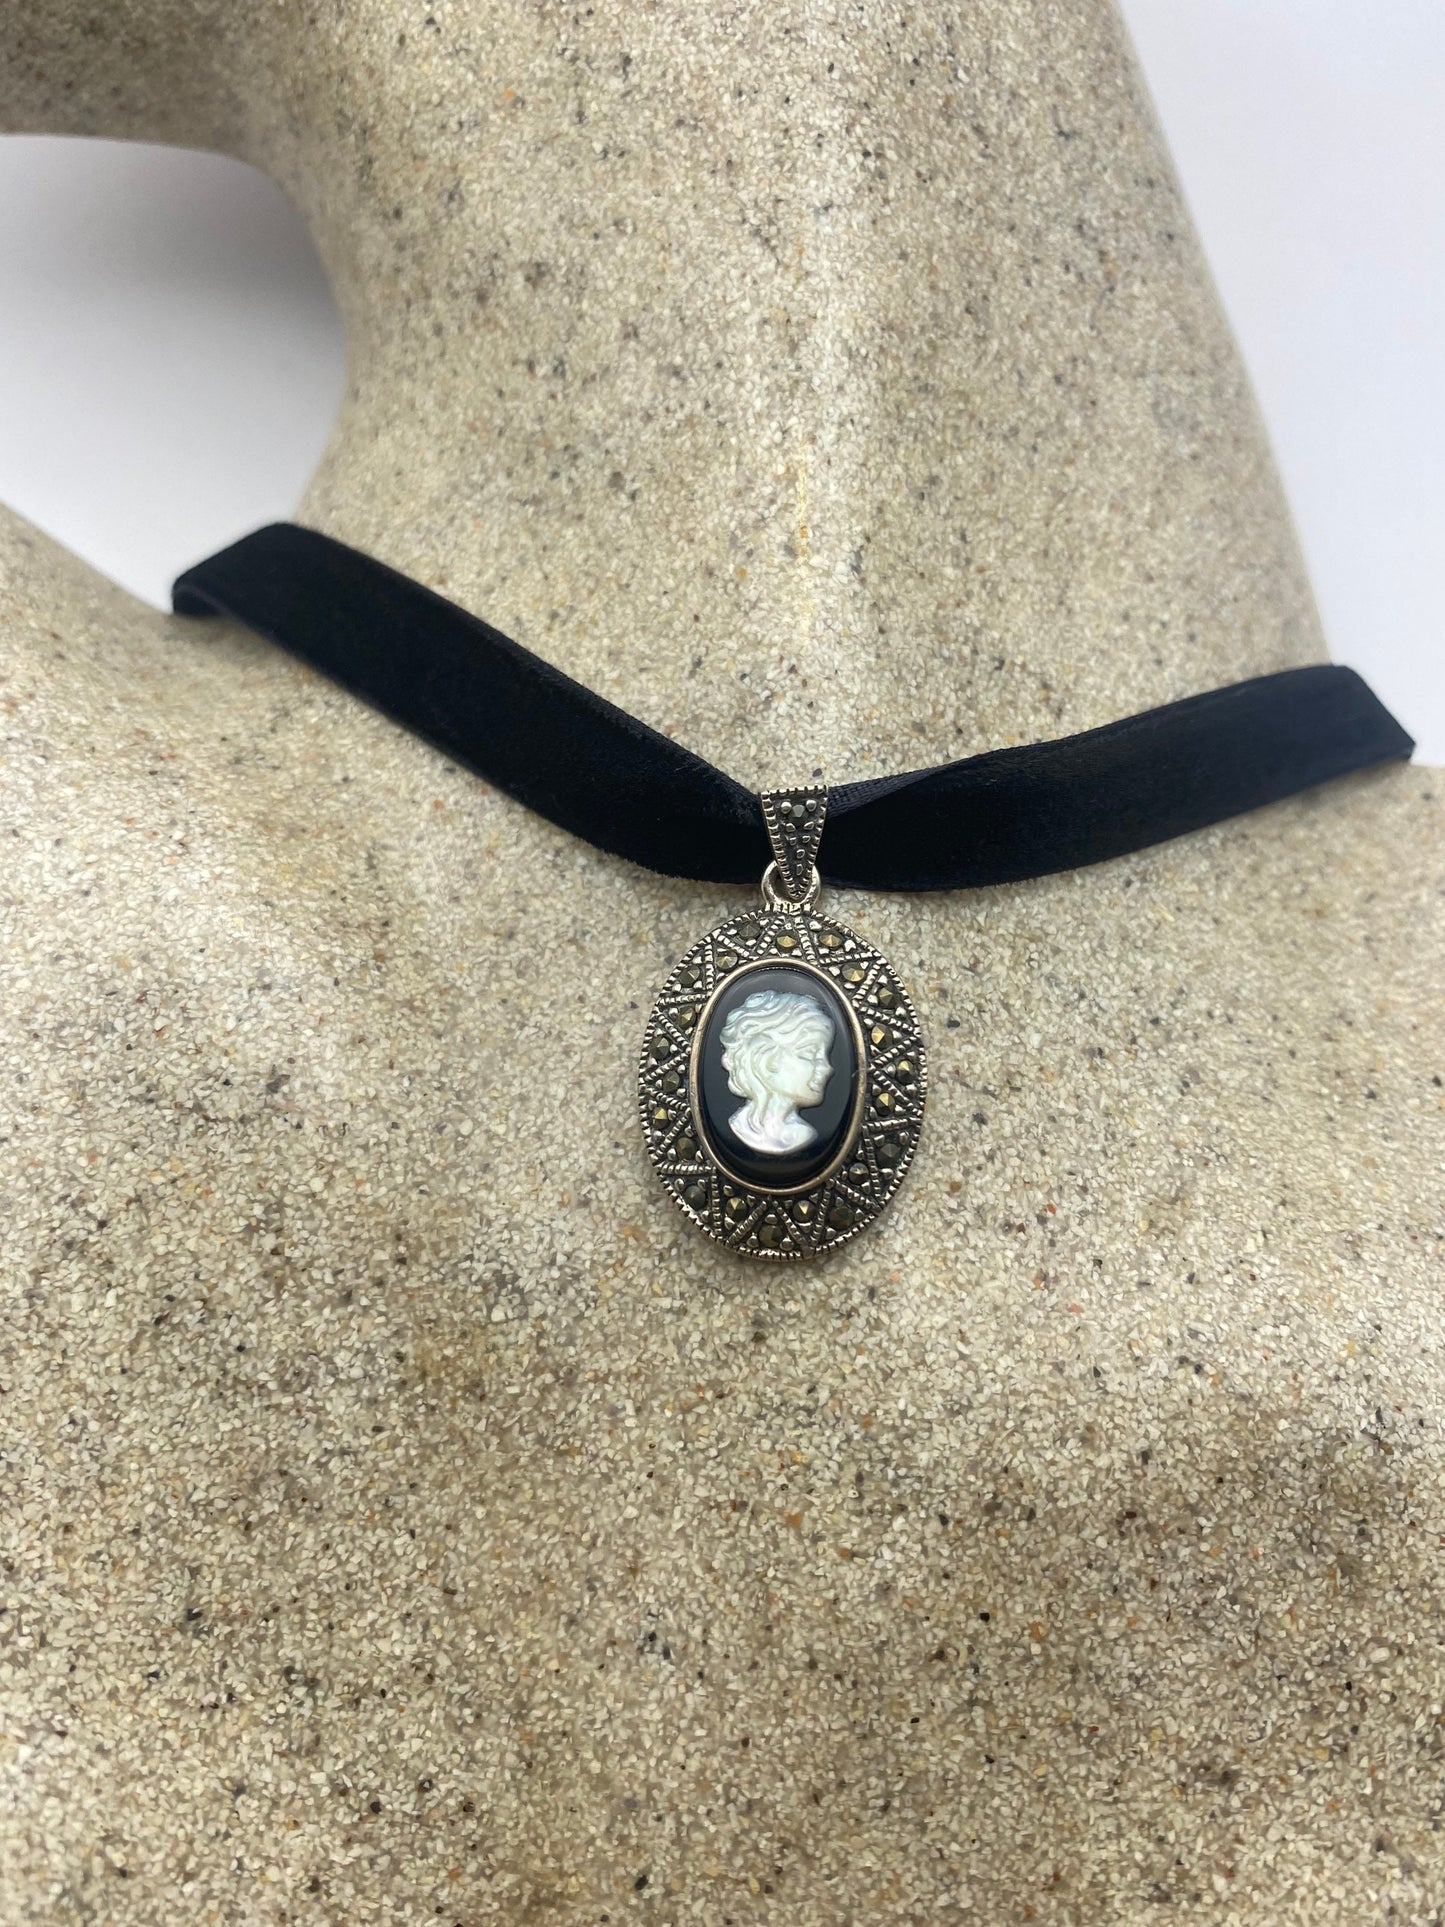 Vintage Black Onyx Mother of Pearl Cameo Choker 925 Sterling Silver Necklace